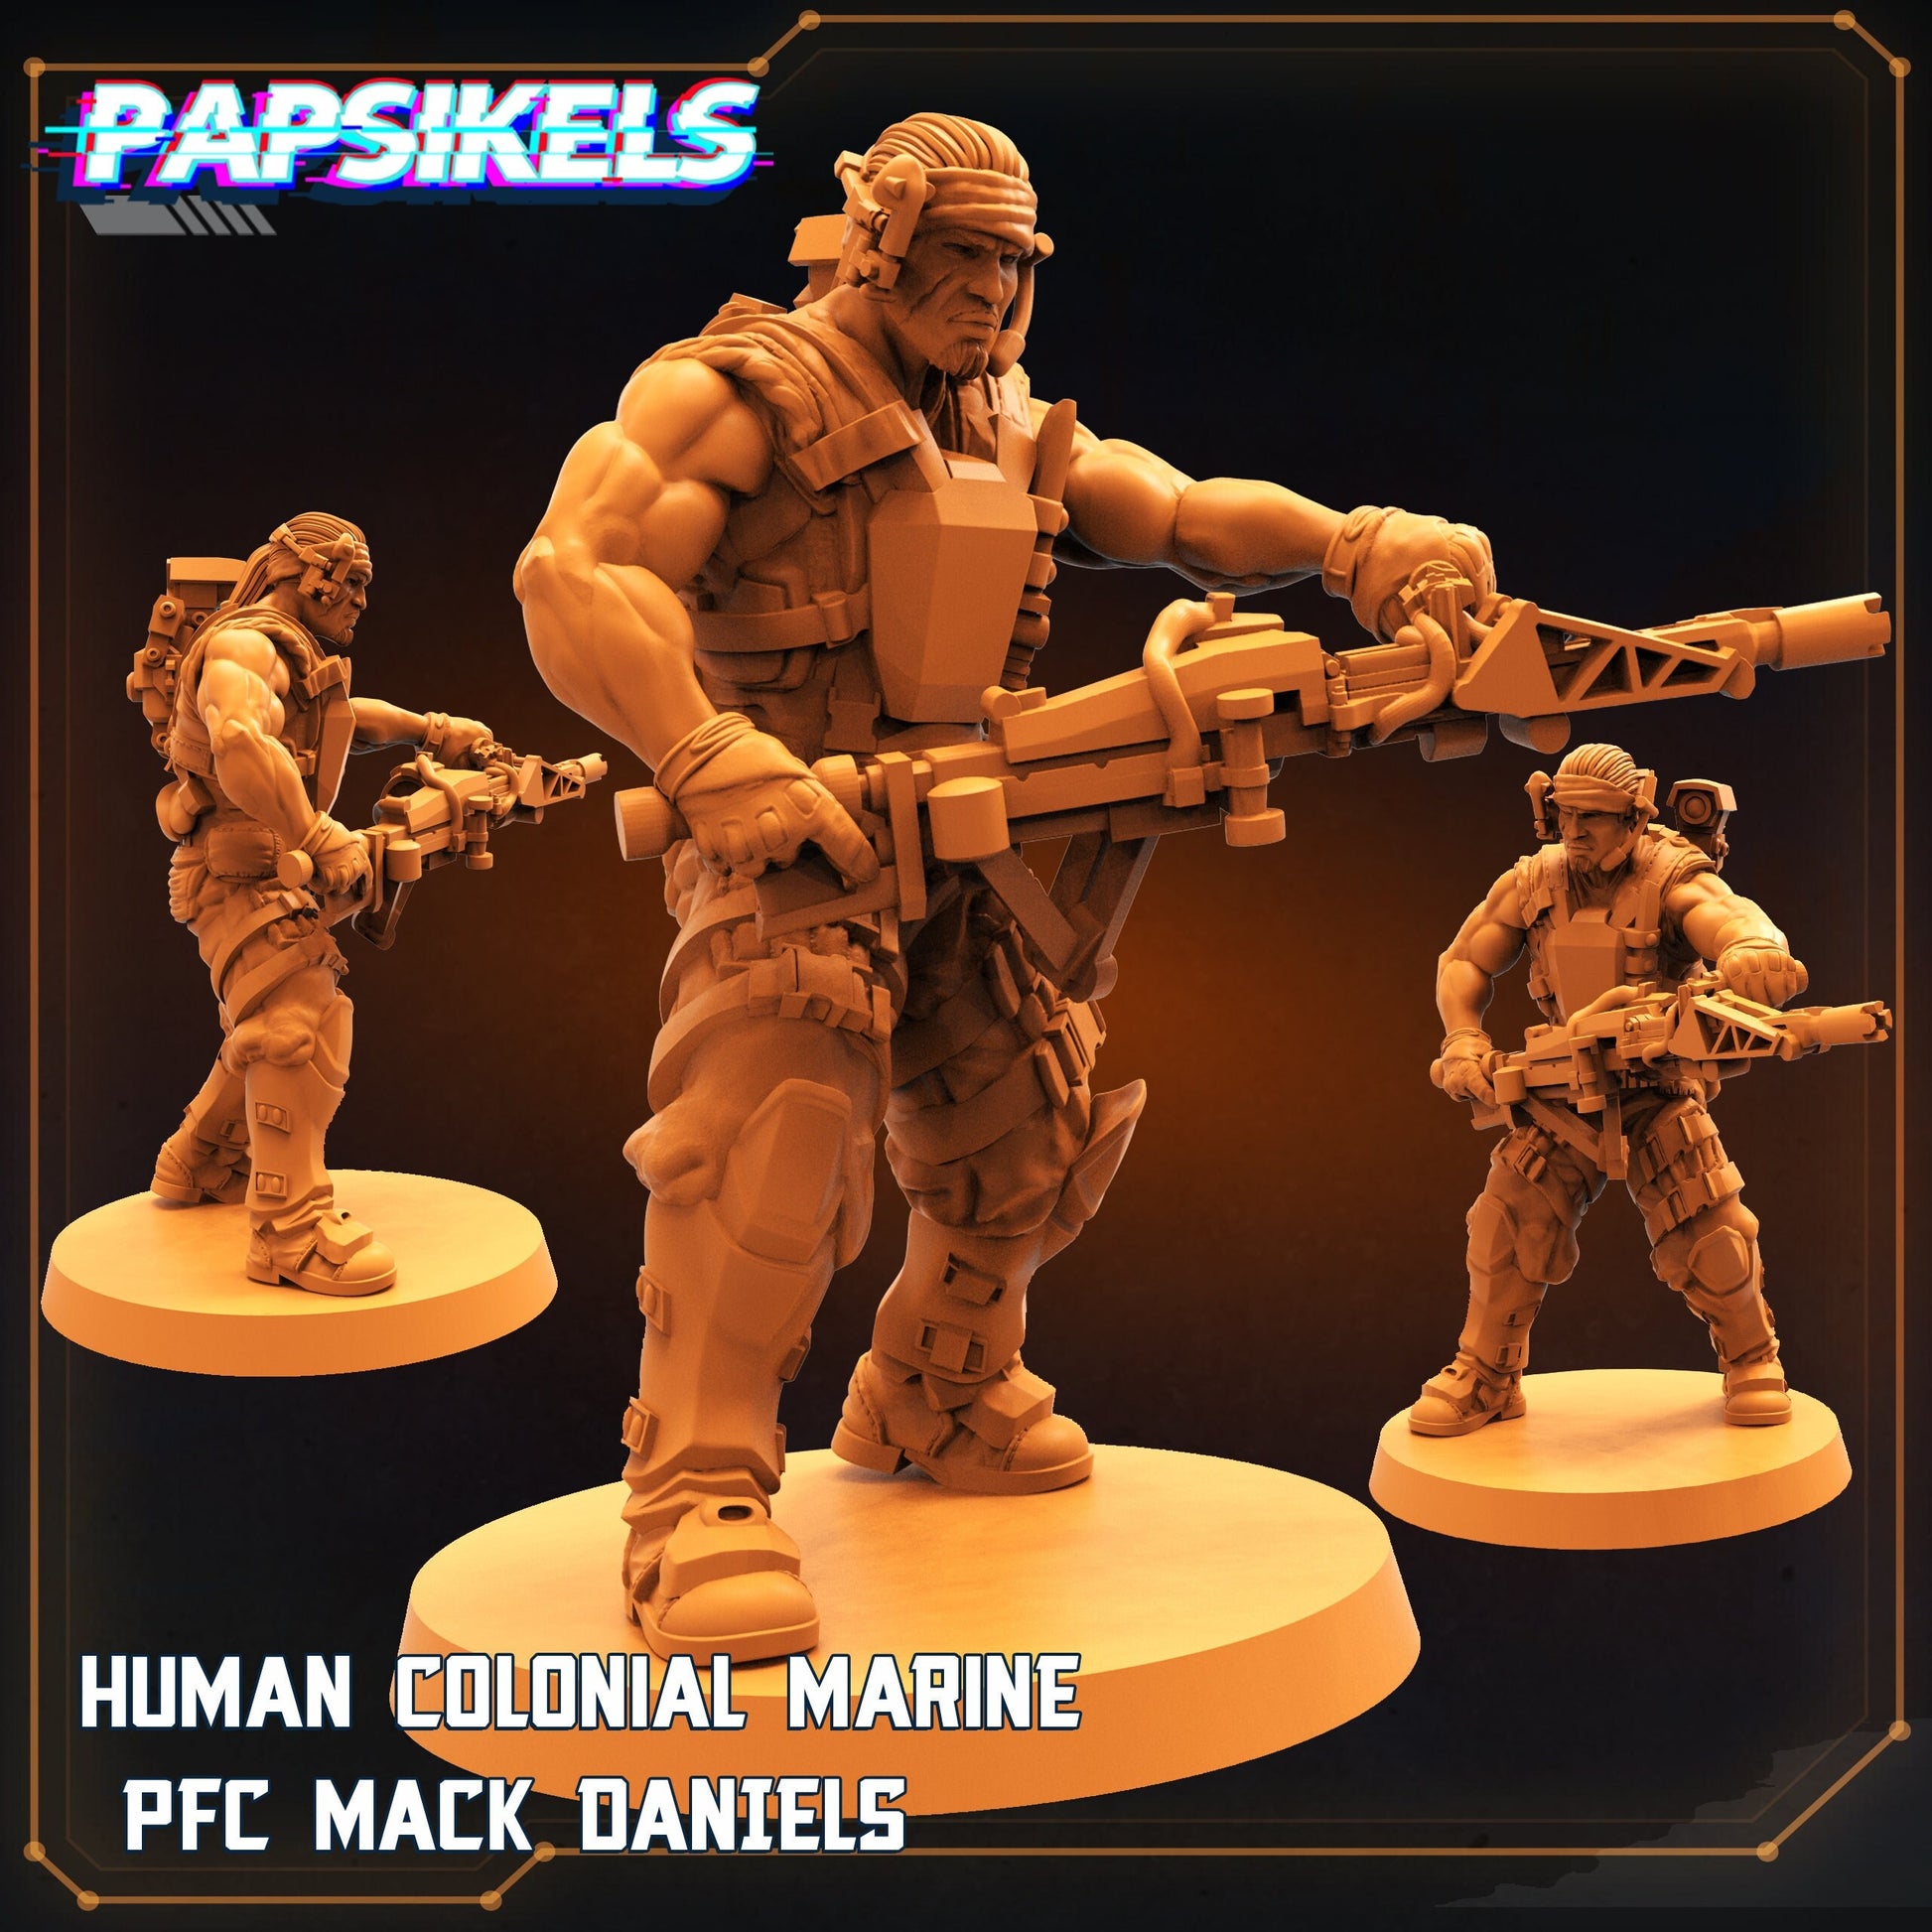 Human Colonial Marine PFC Mack Daniels (sculpted by Papsikels)